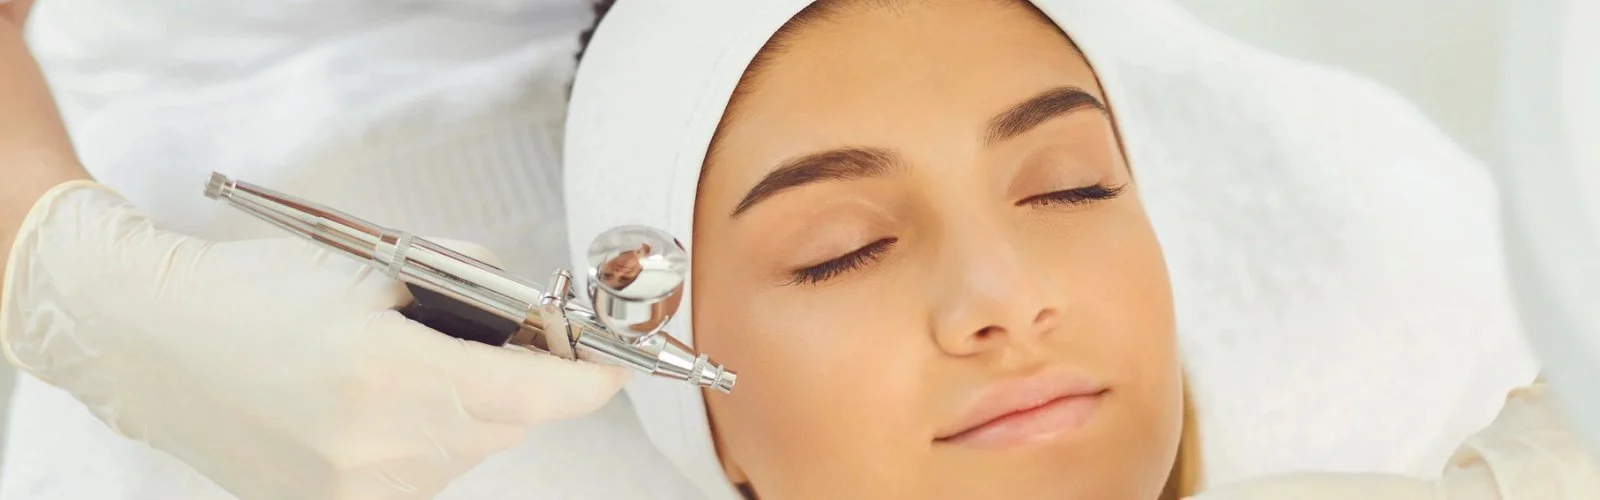 Chemical Peel Treatment After Skin Care Tips